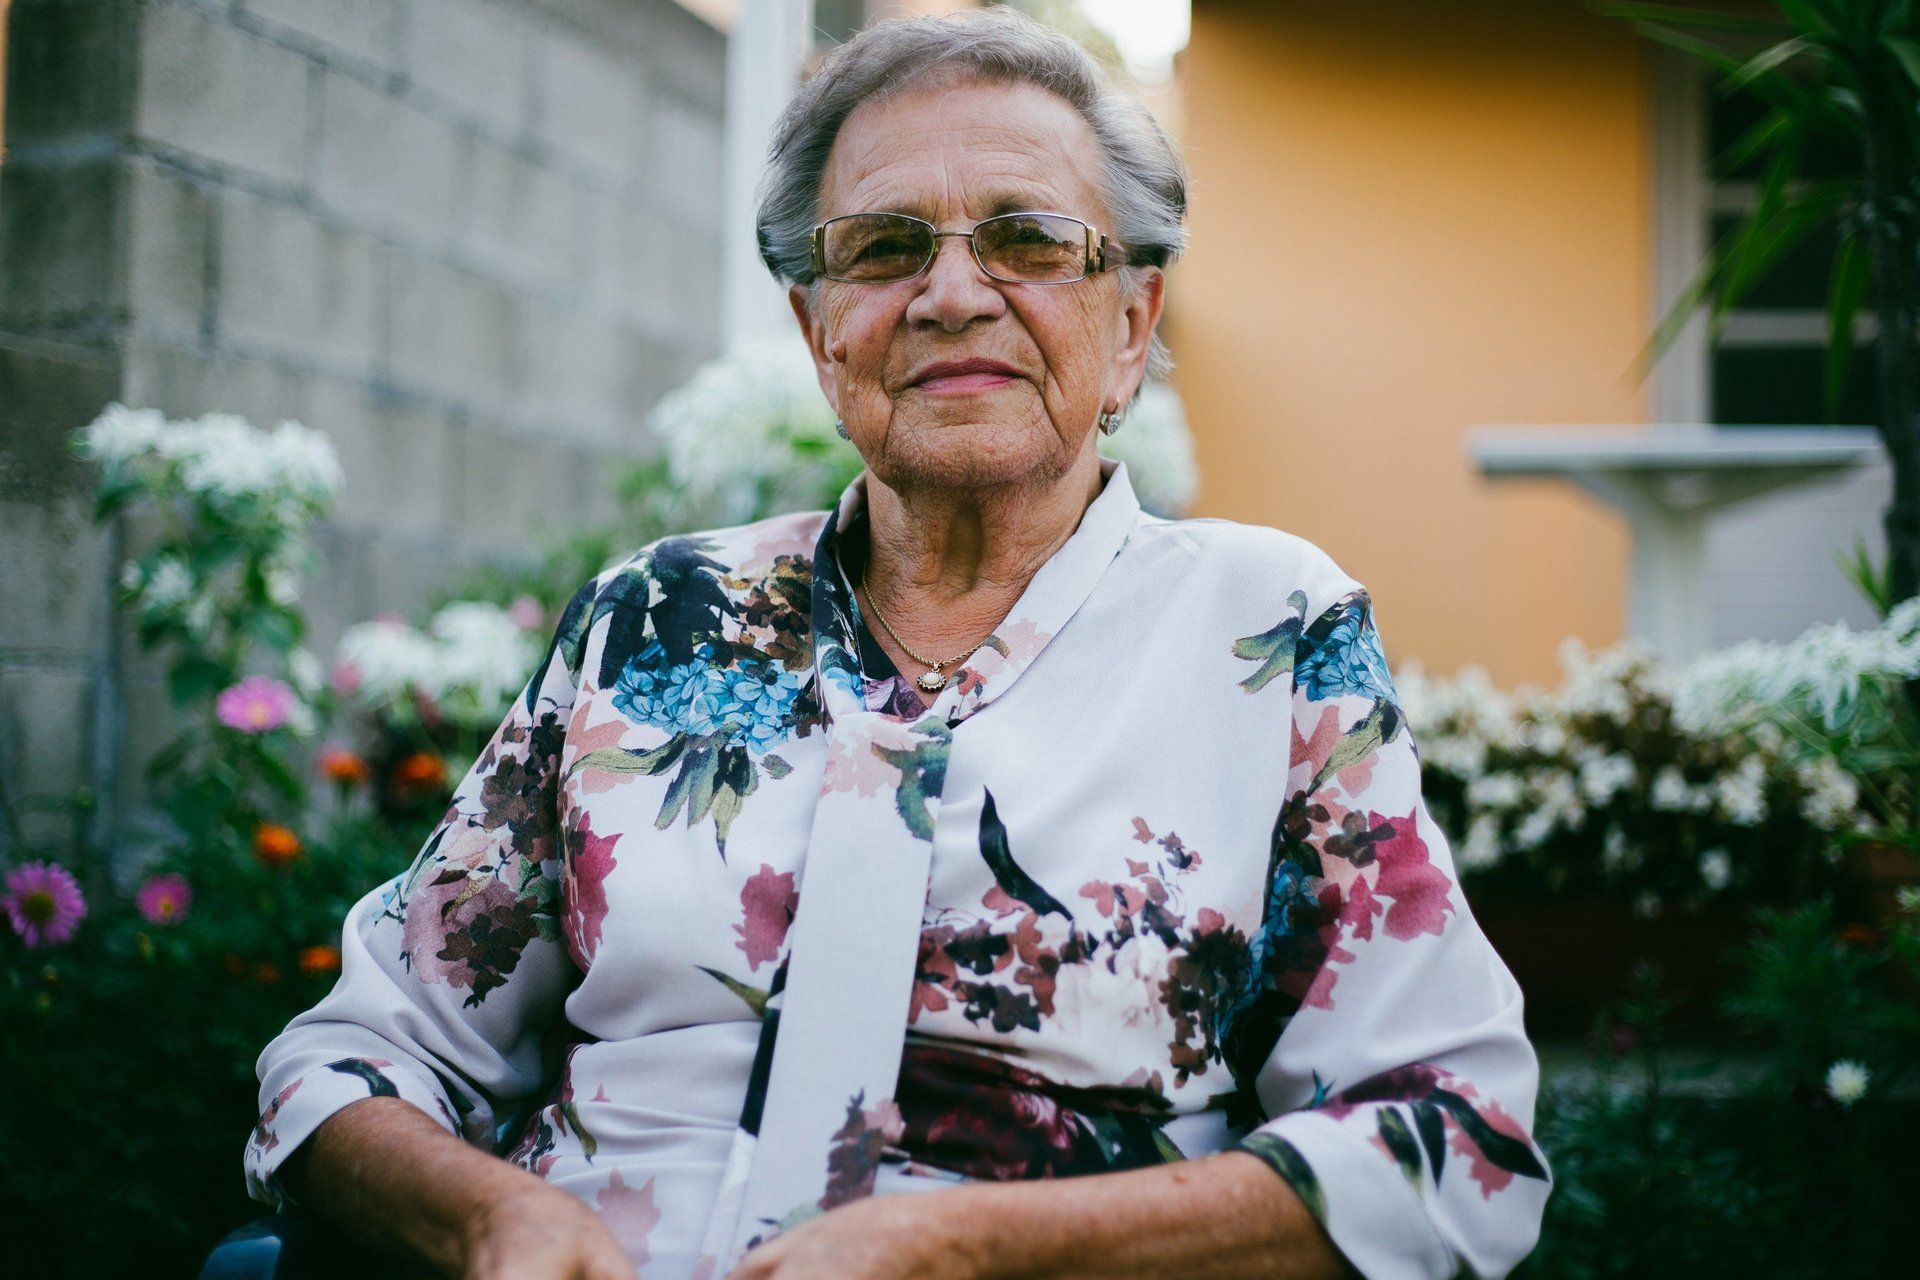 an elderly woman wearing glasses and a floral shirt is sitting in a garden .